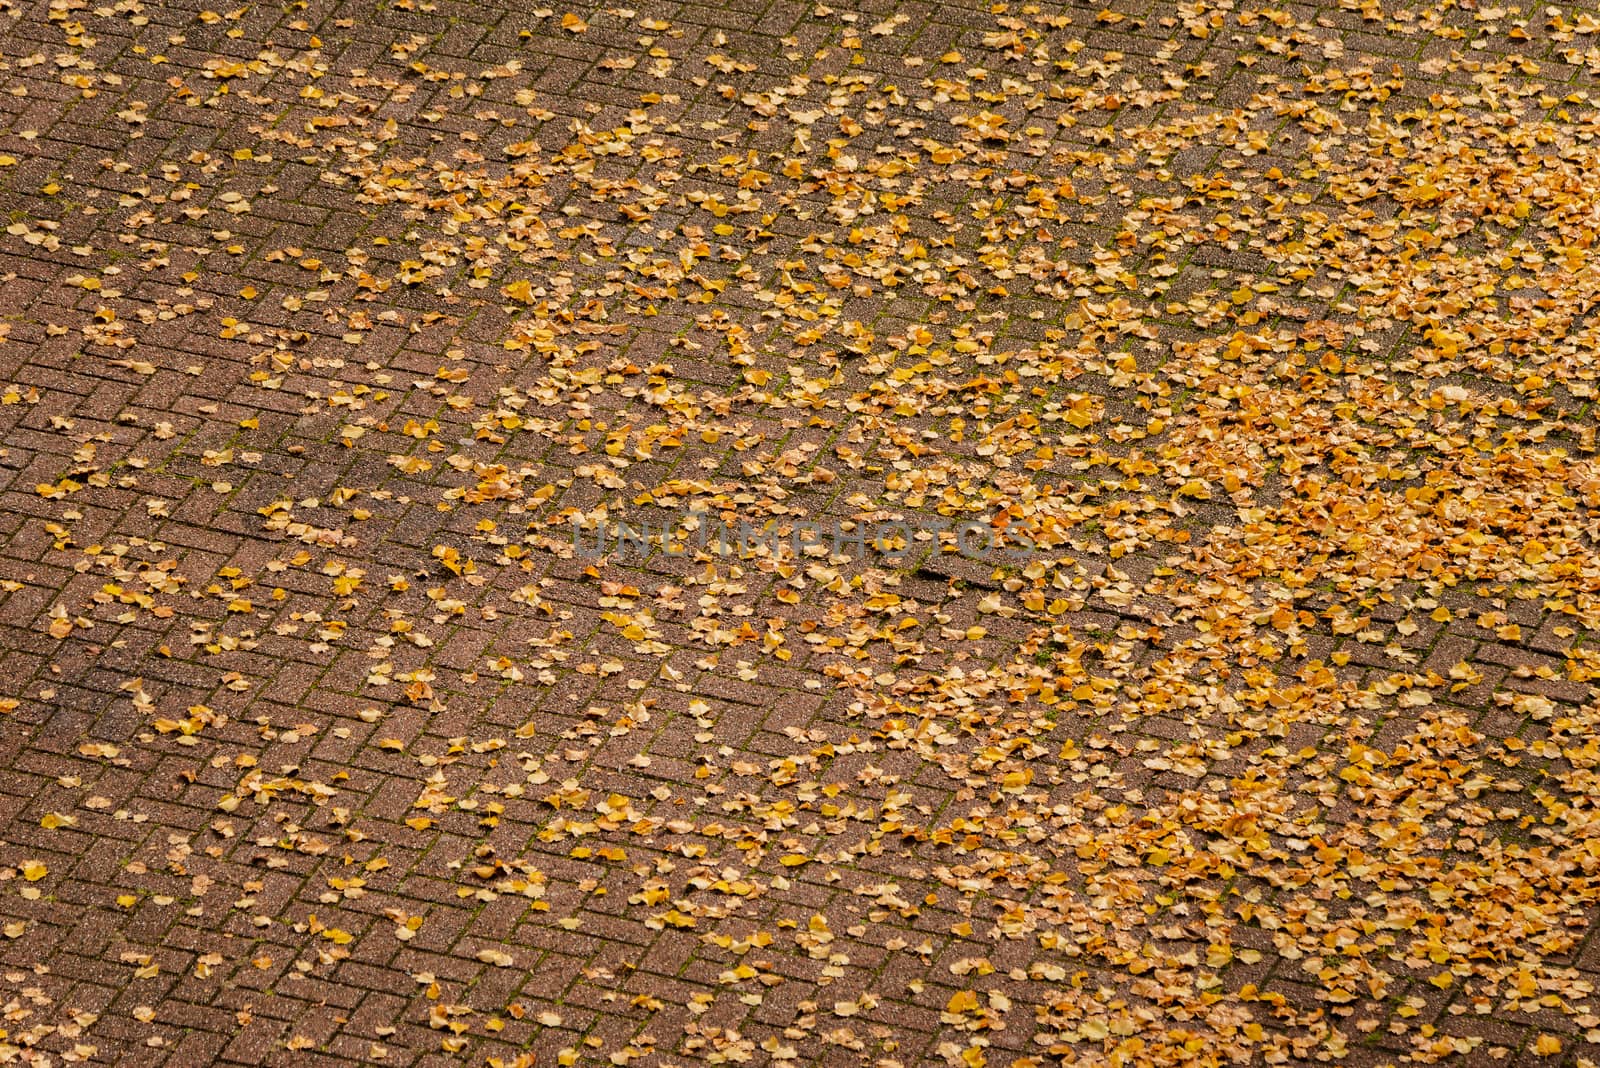 Aerial perspective of autumn leaves covering bricks on the ground by Pendleton